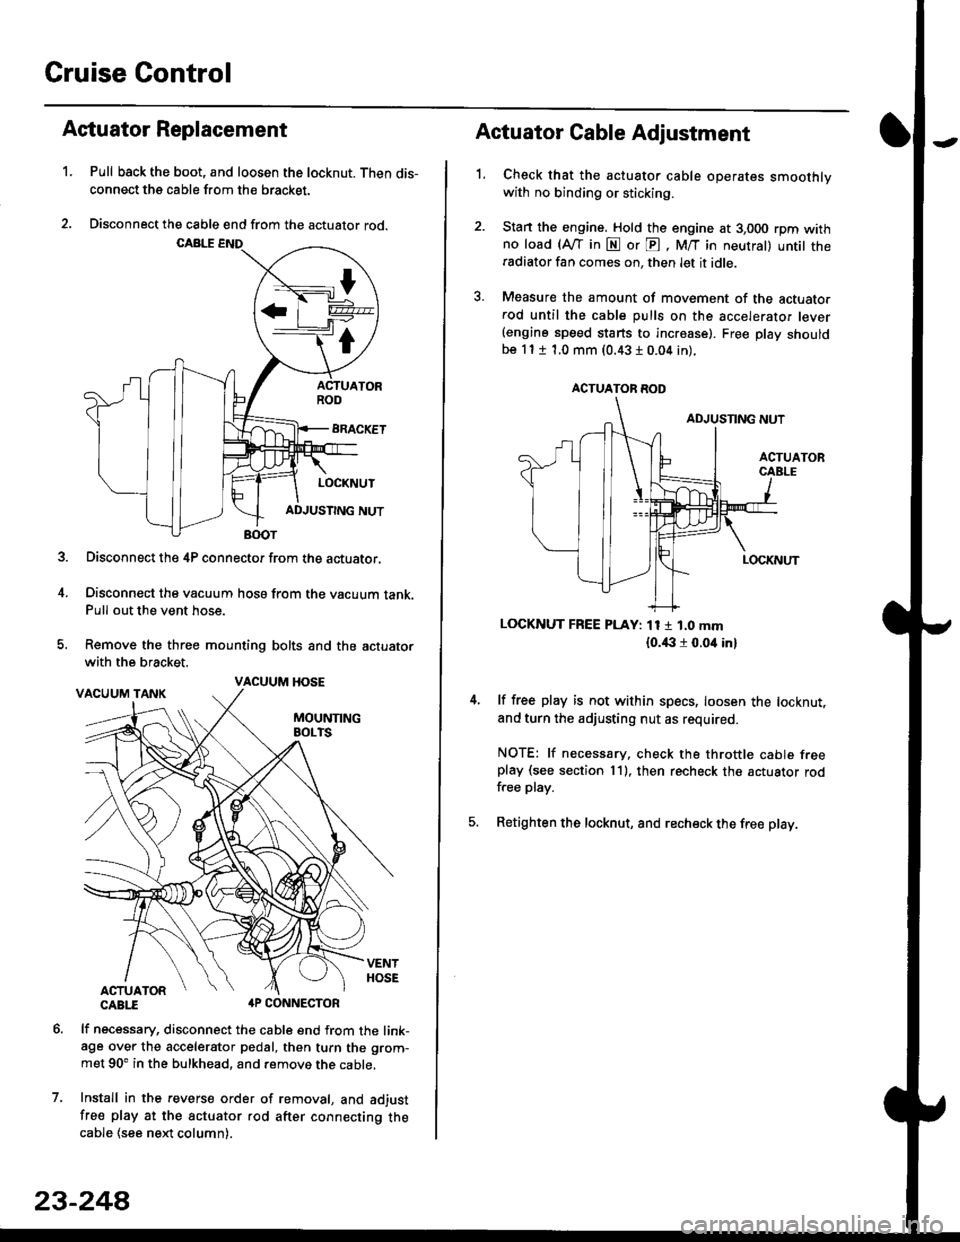 HONDA CIVIC 1998 6.G Manual PDF Cruise Control
t
D=
t
Astuator Replacement
1.Pull back the boot, and loosen the locknut. Then dis-
connect the cable from the bracket.
Disconnect the cable end from the actuator rod.
Disconnect the 4P